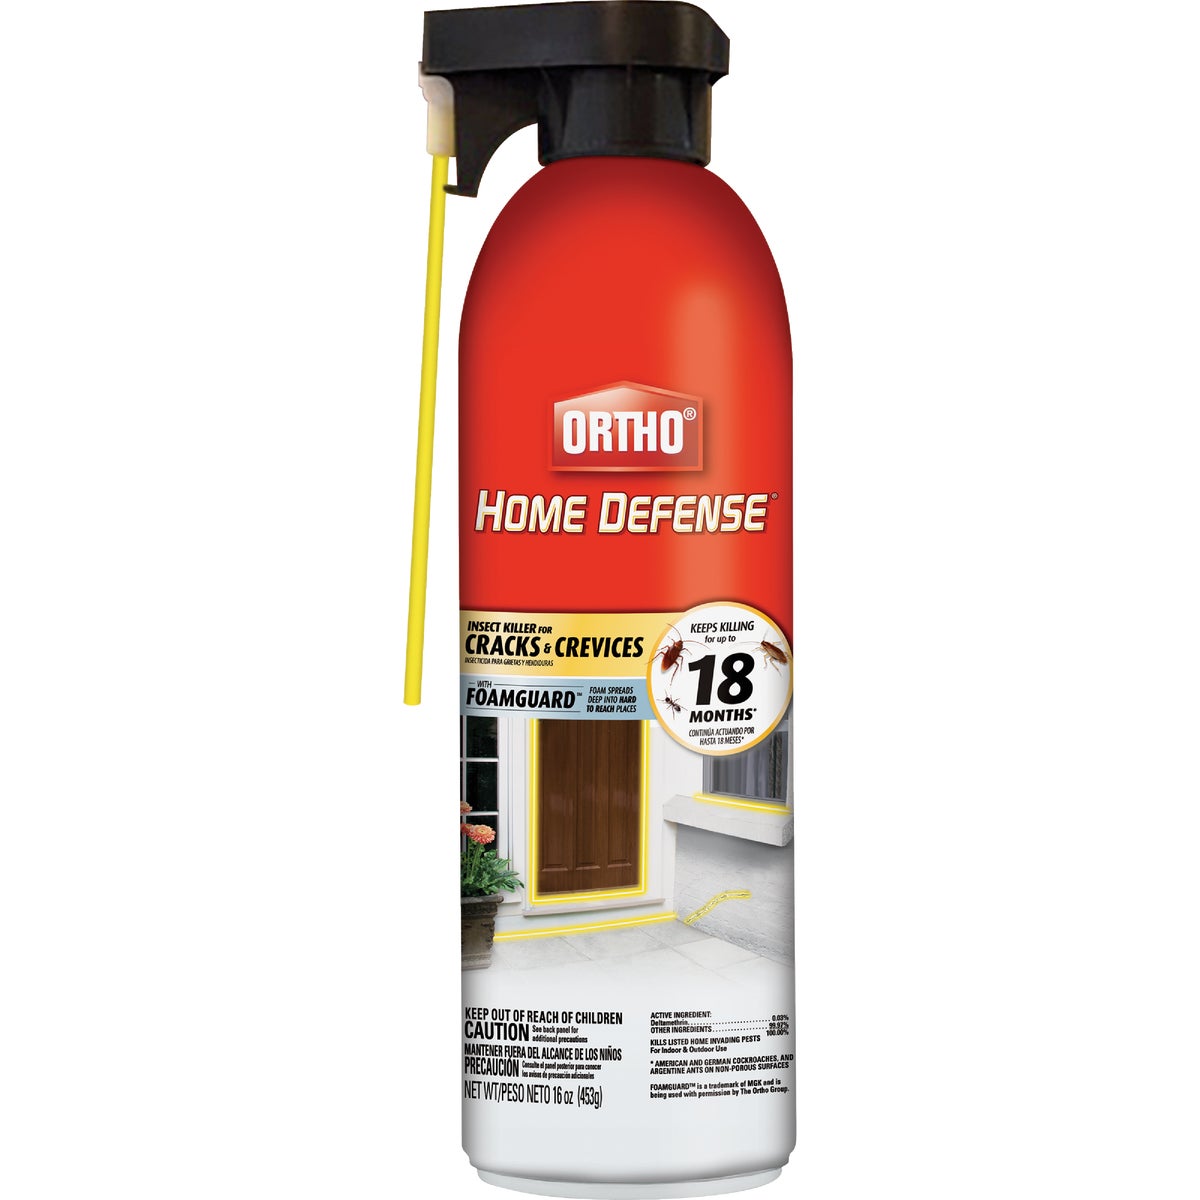 Ortho Home Defense 16 Oz. Ready To Use Aerosol Foaming Cracks & Crevices Insect Killer